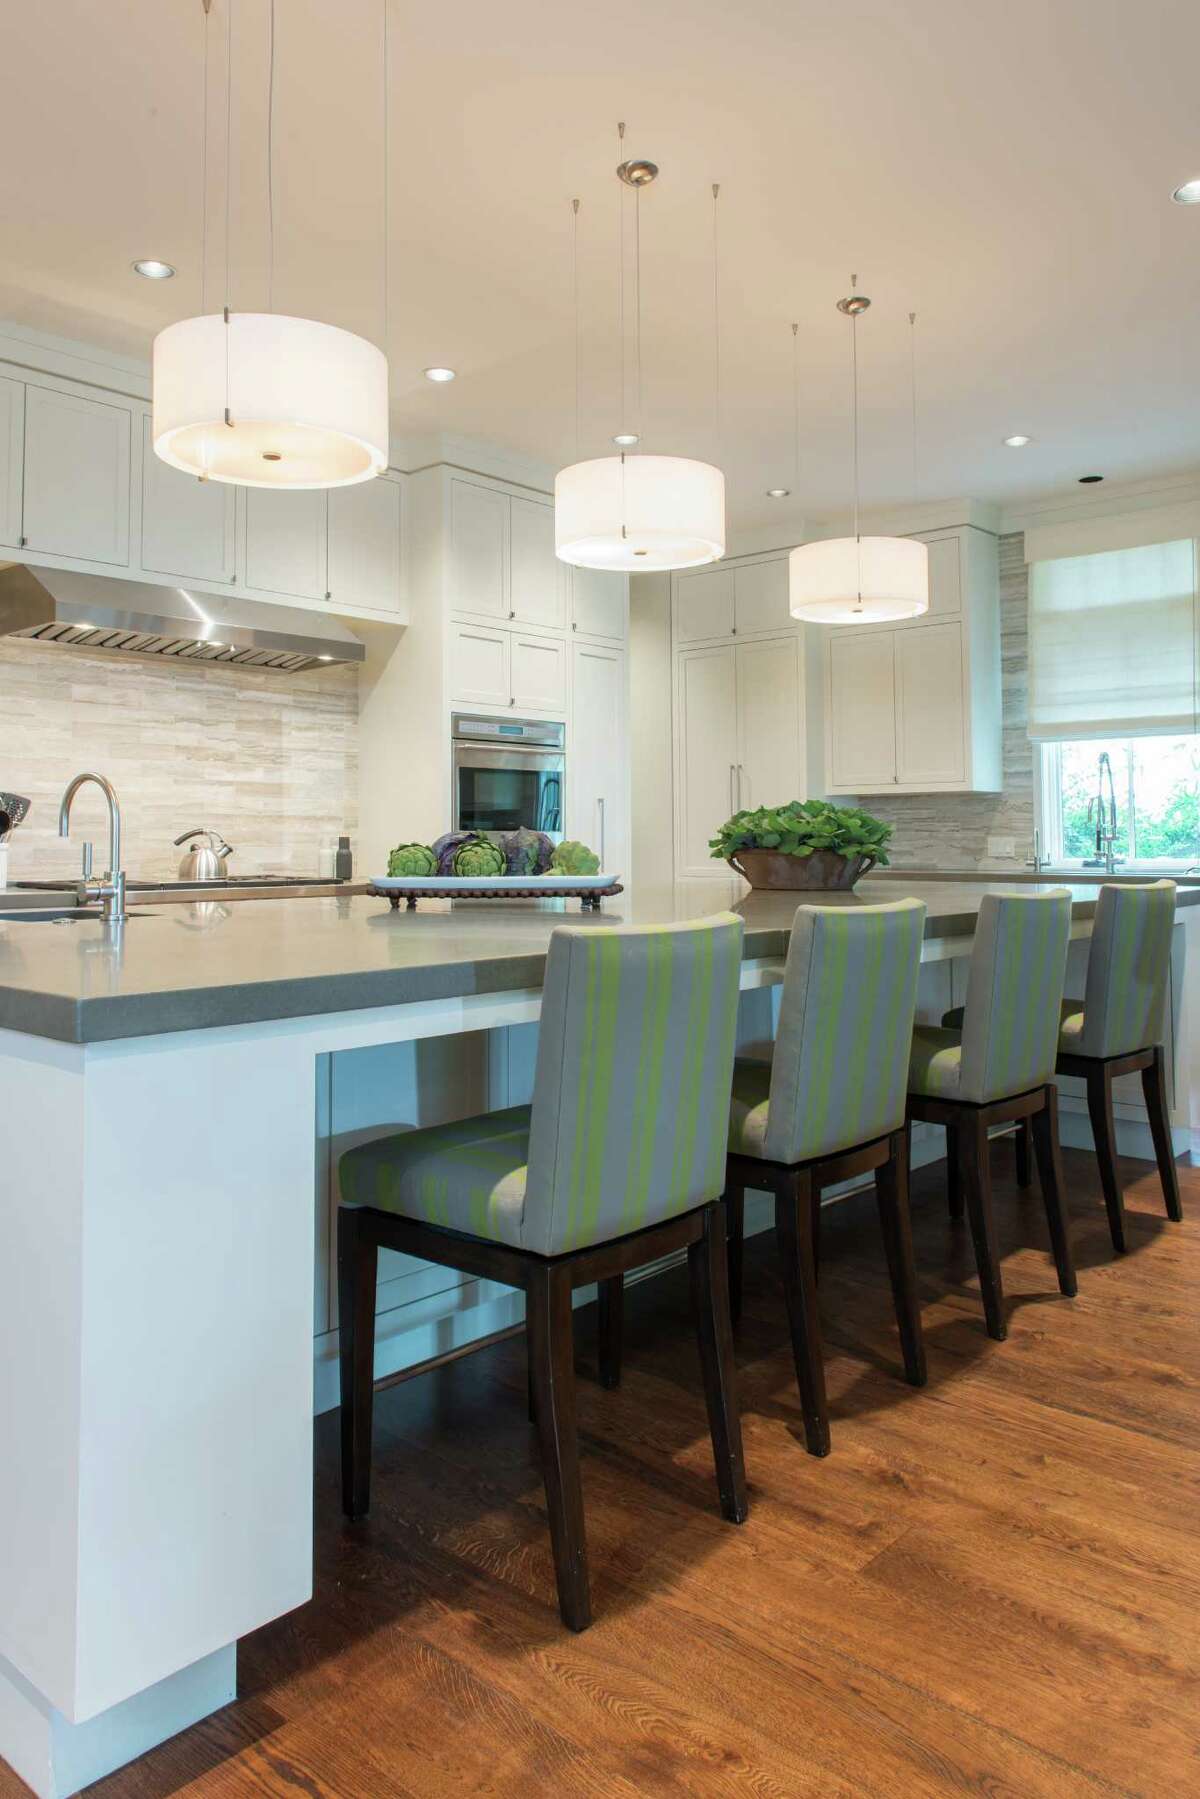 At the kitchen island, the custom-made barstools are designed to swivel - a feature Noelle Reed requested so her triplets wouldn't tip their stools backward when they pushed back from the counter.